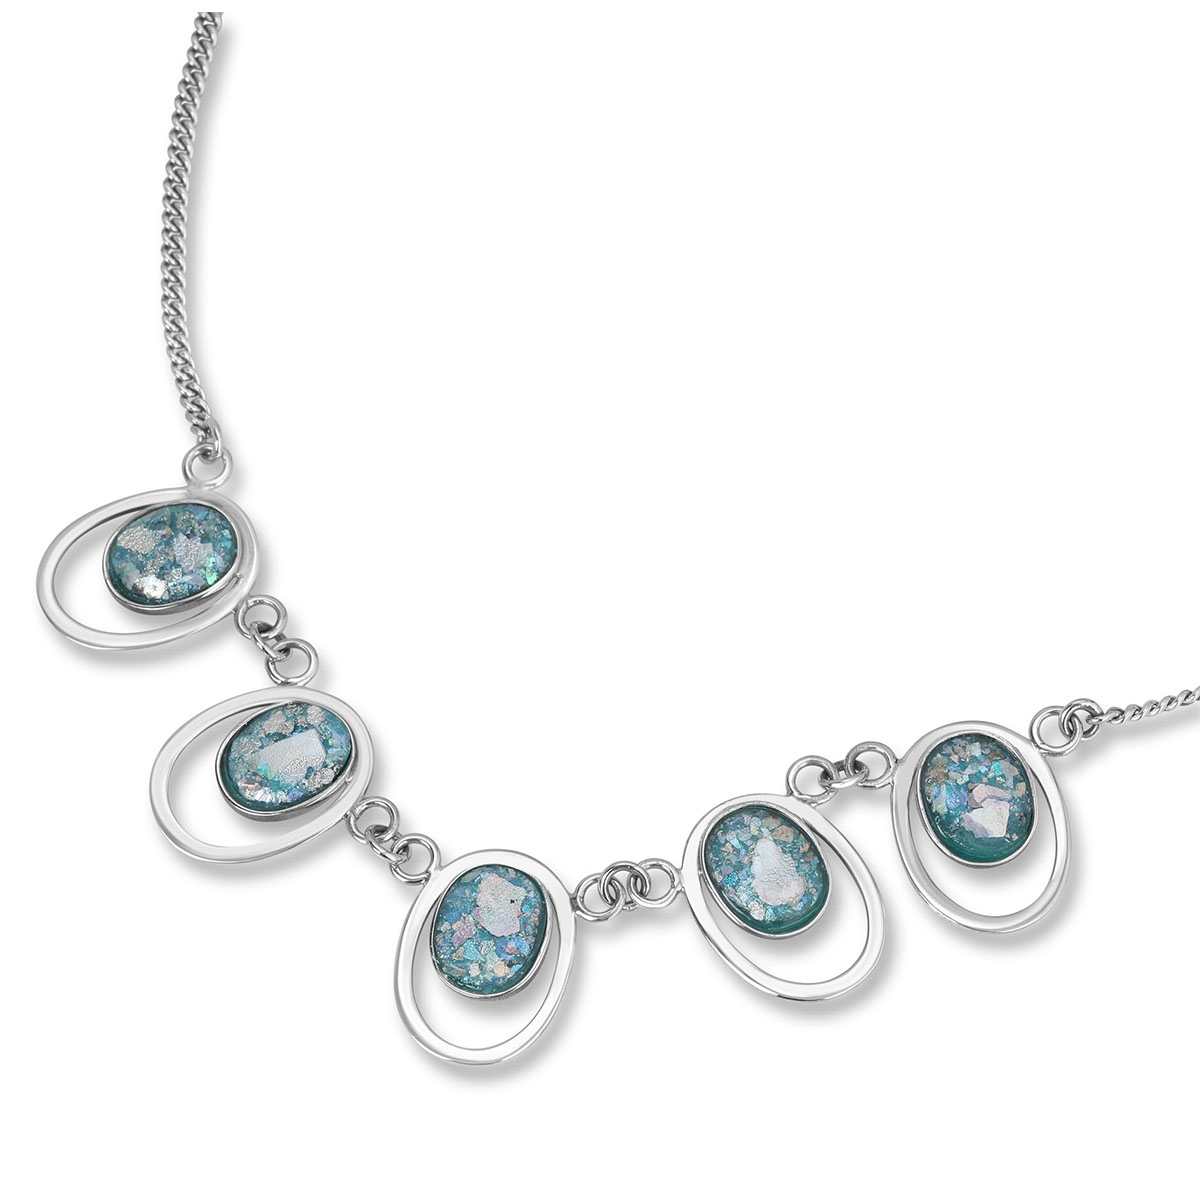 Oval Roman Glass and Sterling Silver Necklace  - 1